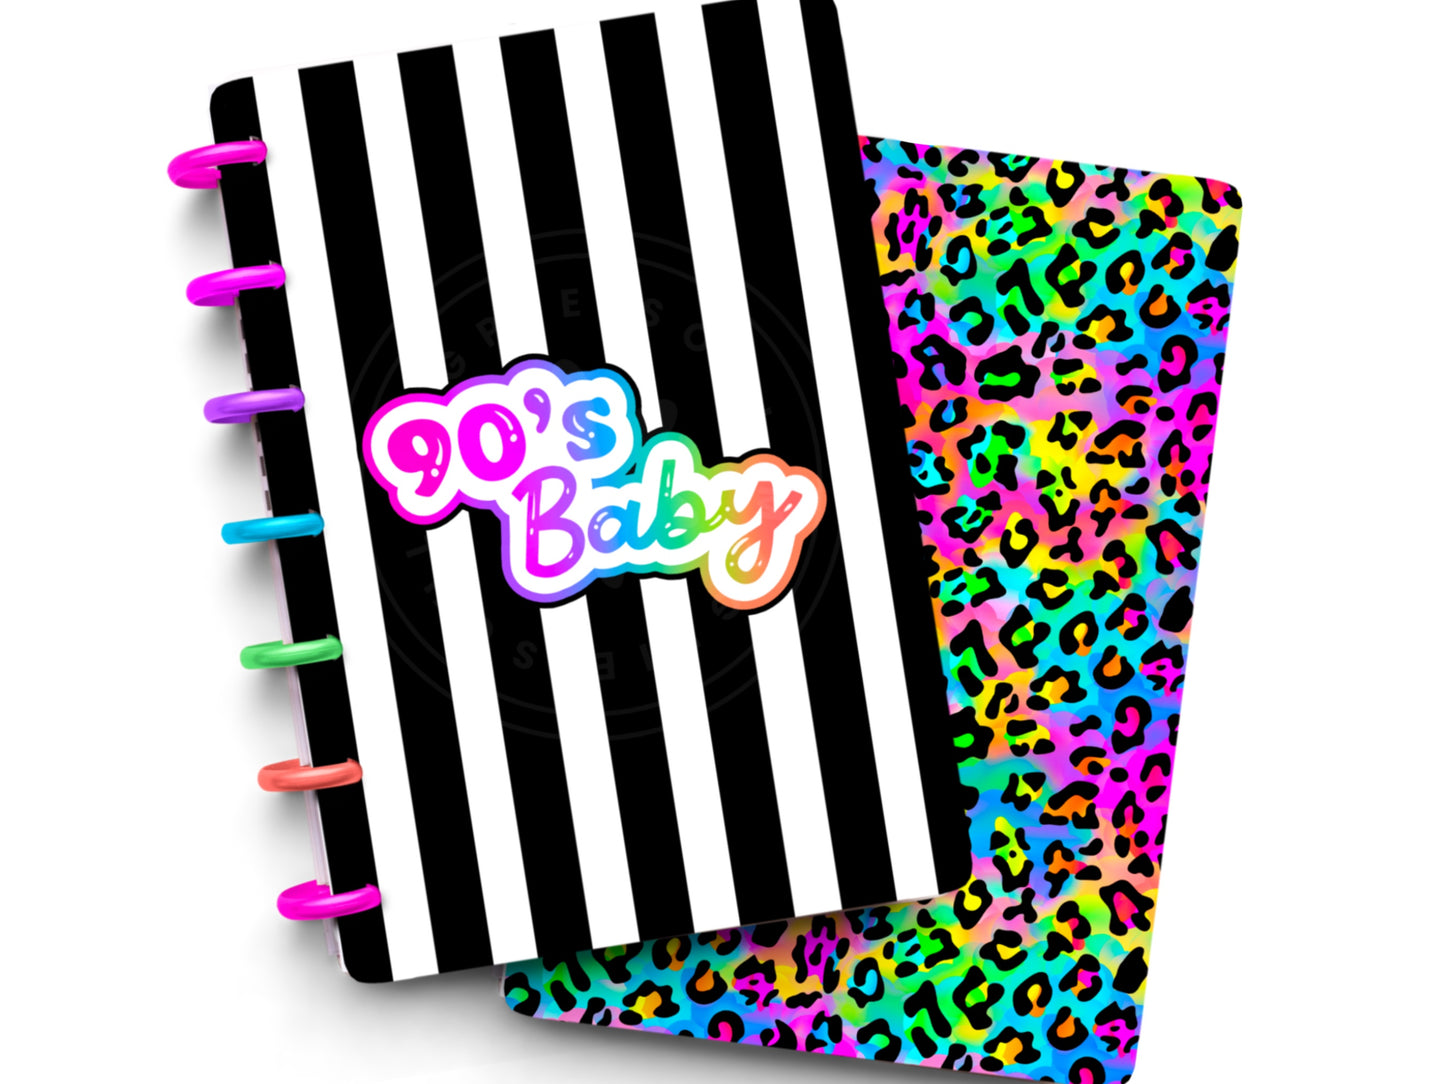 90’s Baby Leopard Laminated Planner Cover